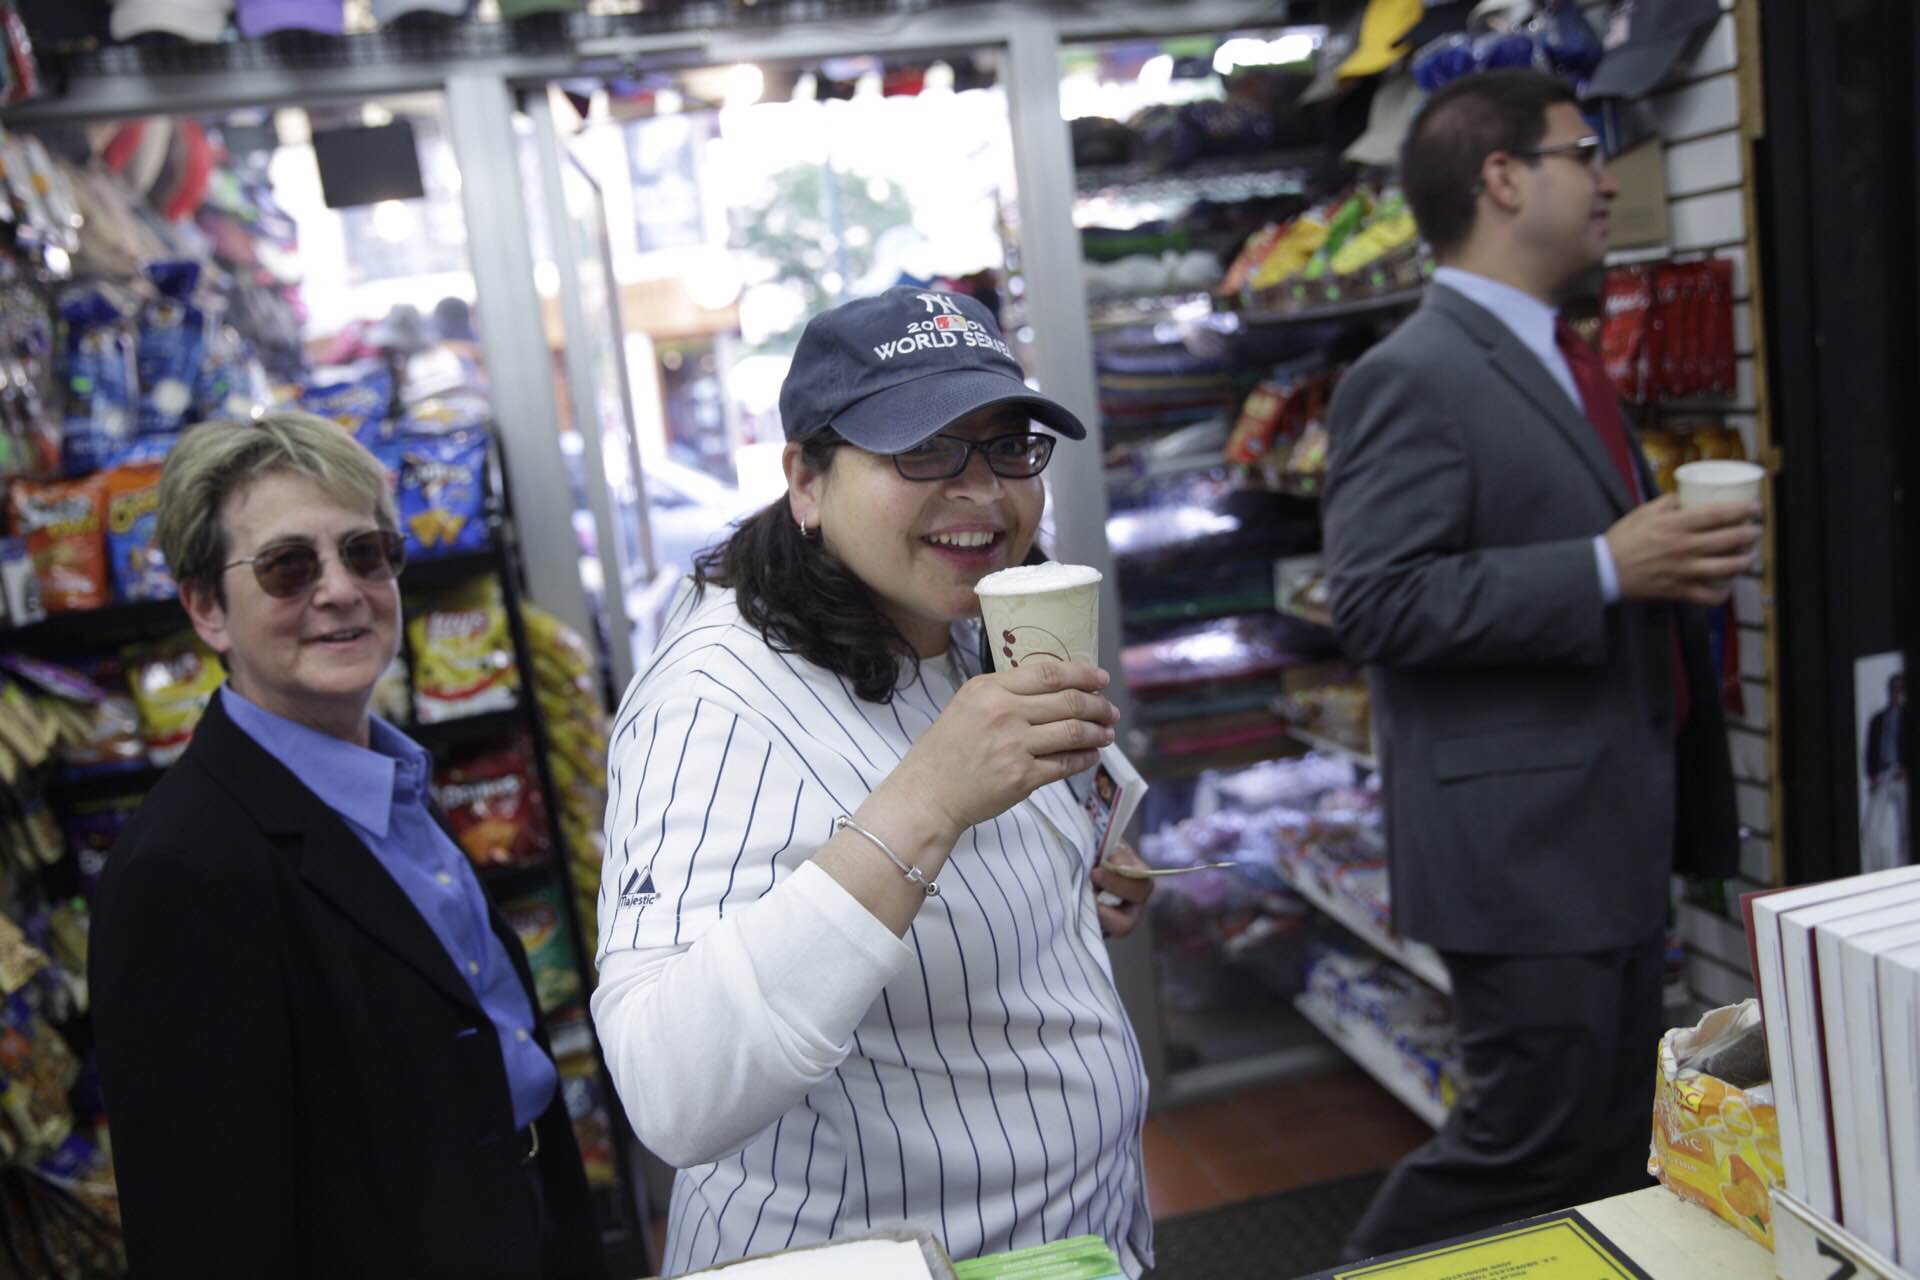 Rosie Mendez enjoyed a classic egg cream at Gem Spa. Photo by William Alatriste / NYC Council